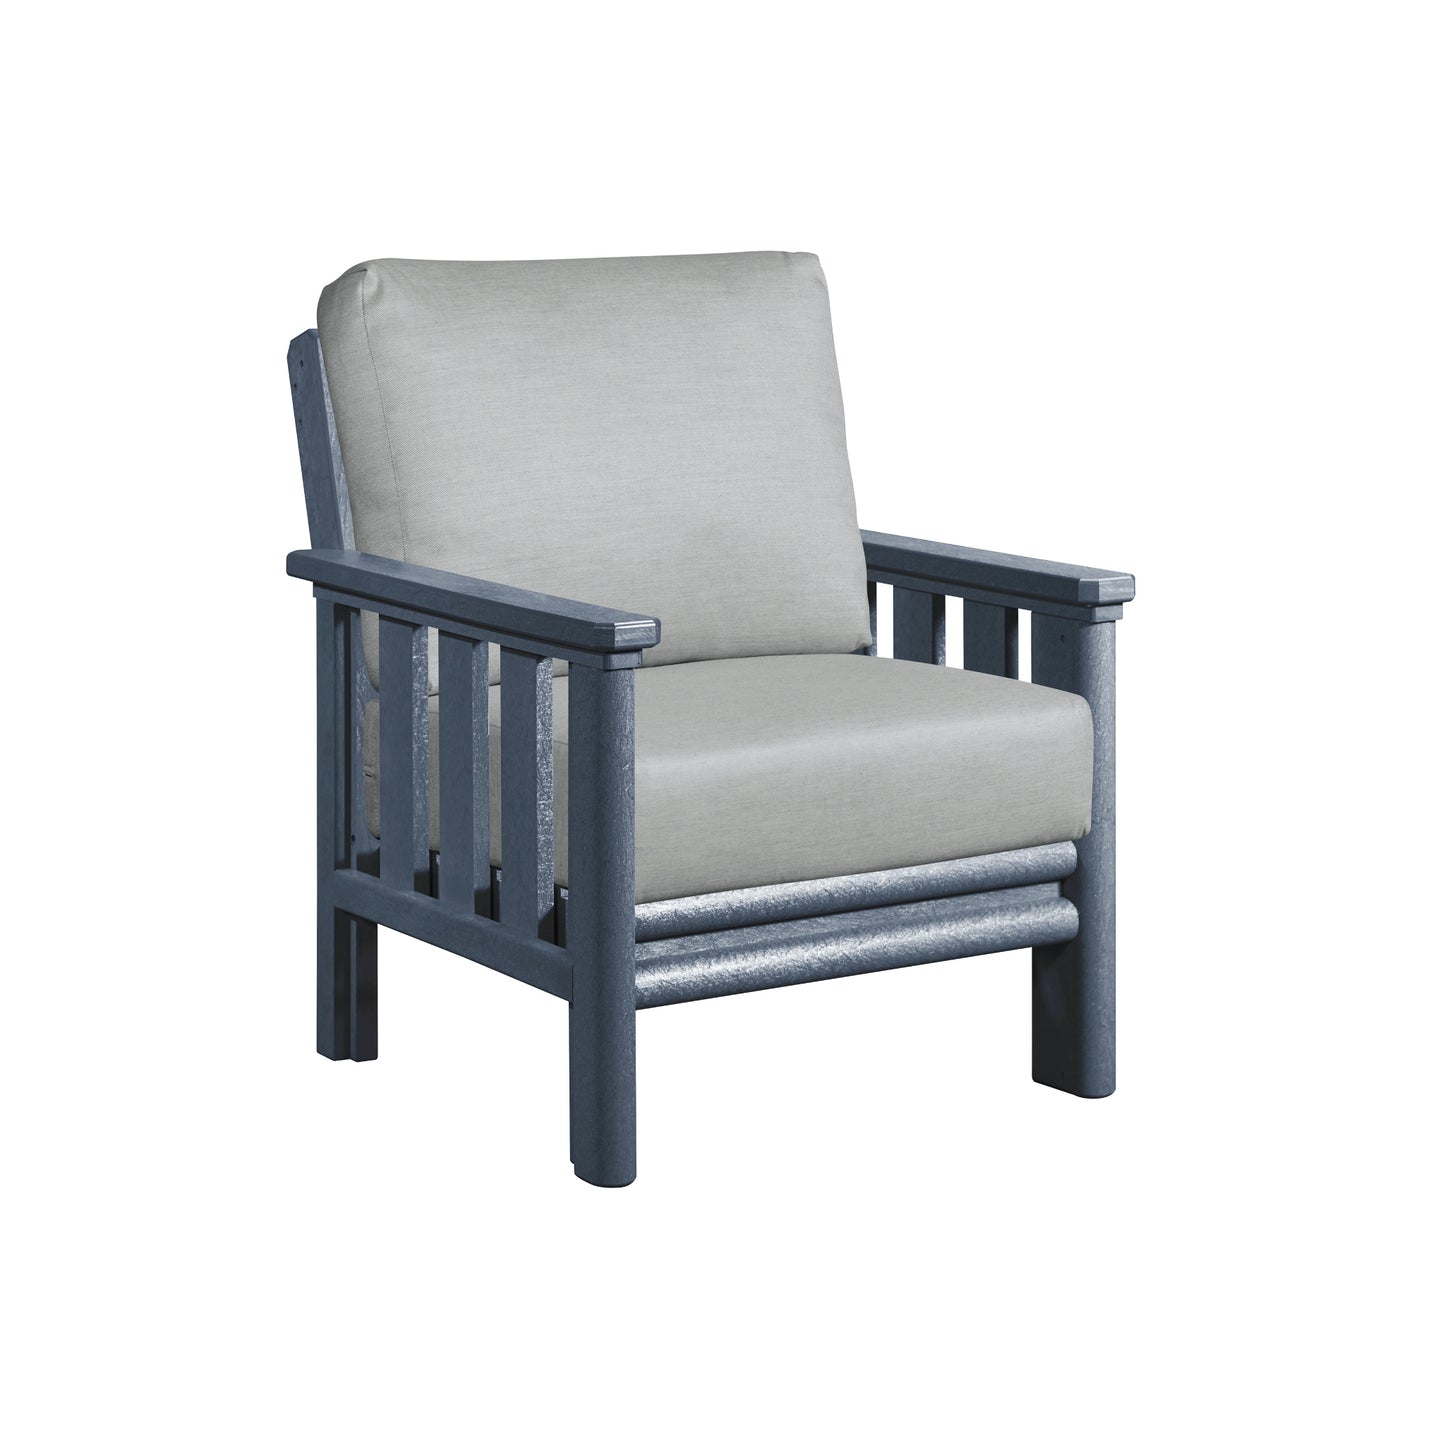 Stratford Arm Chair - SLATE GREY FRAME WITH CUSHIONS - DSF261-18 [DSF141]